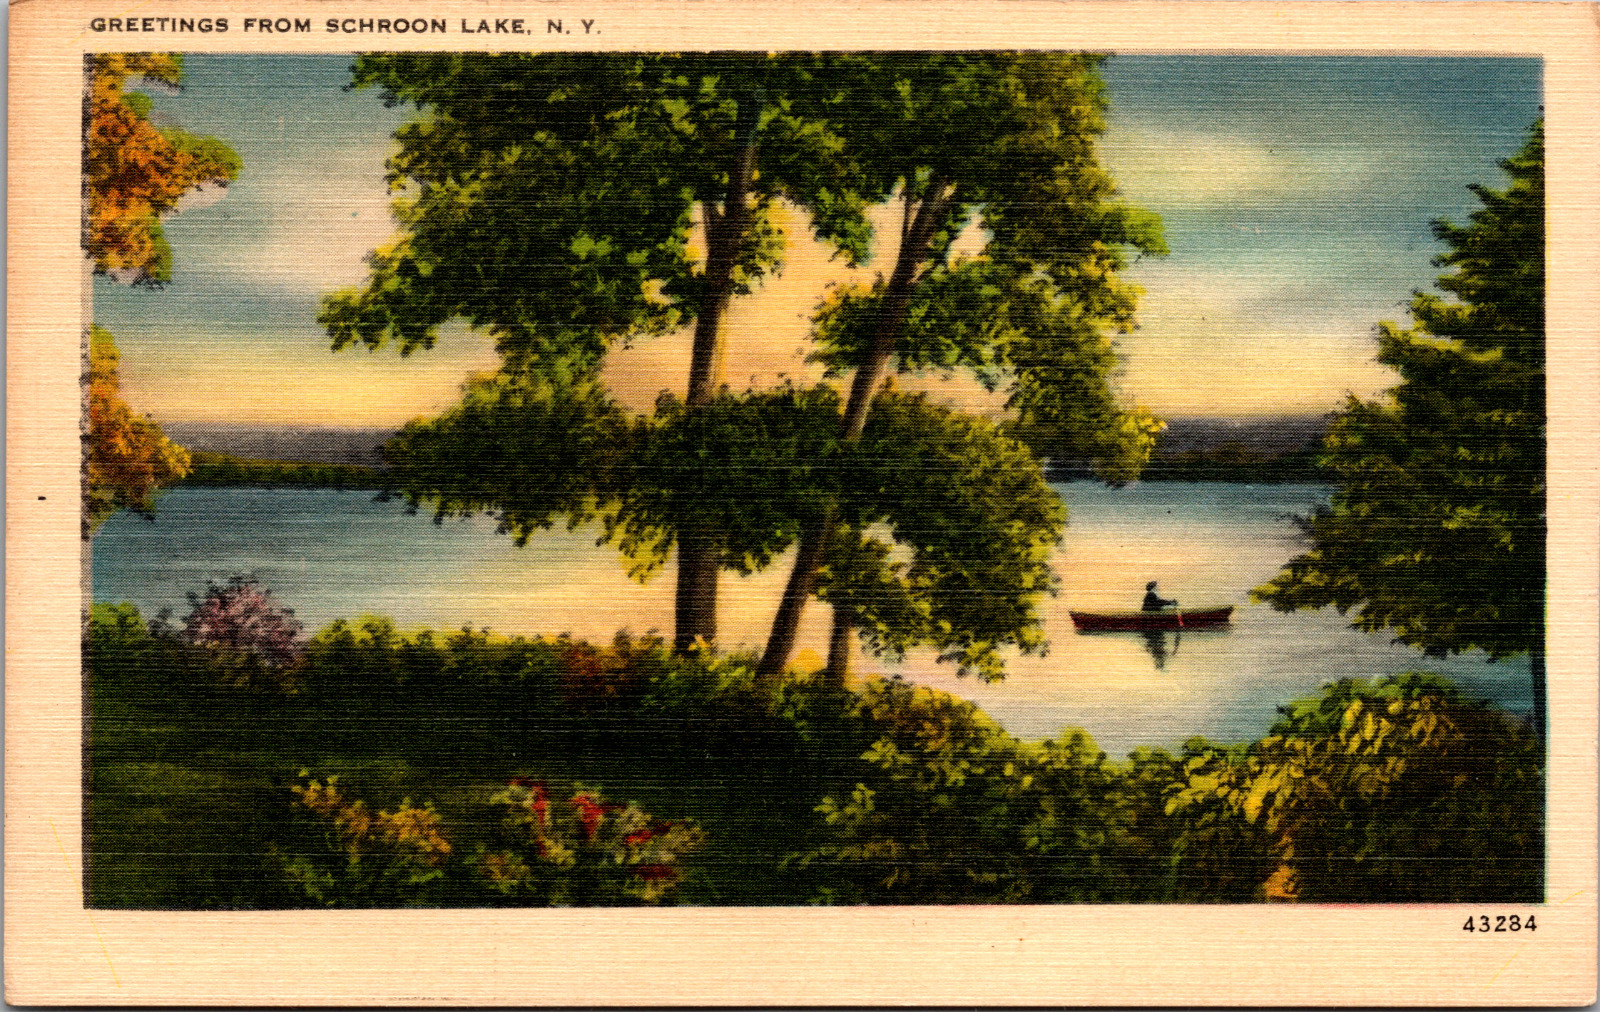 Vintage 1920s A Peaceful Boating Greeting From Schroon Lake New York NY Postcard